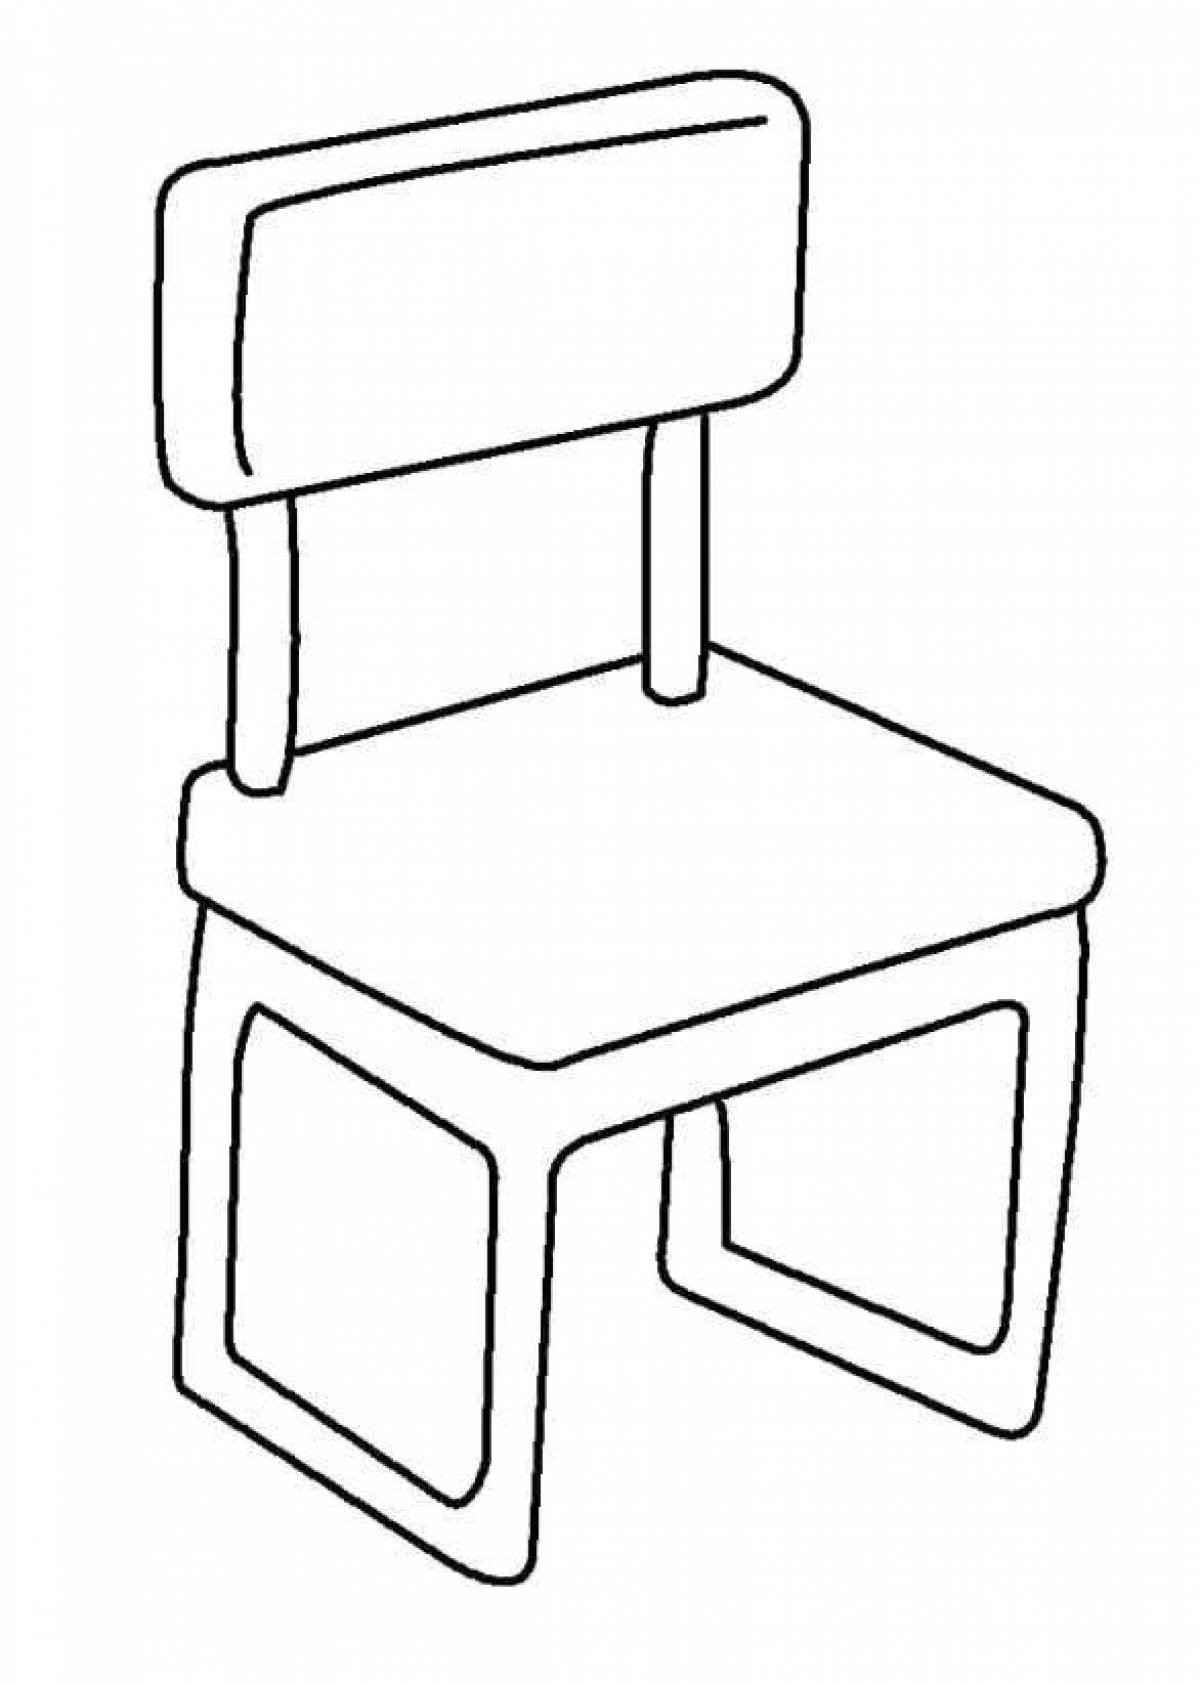 Coloring book shining high chair